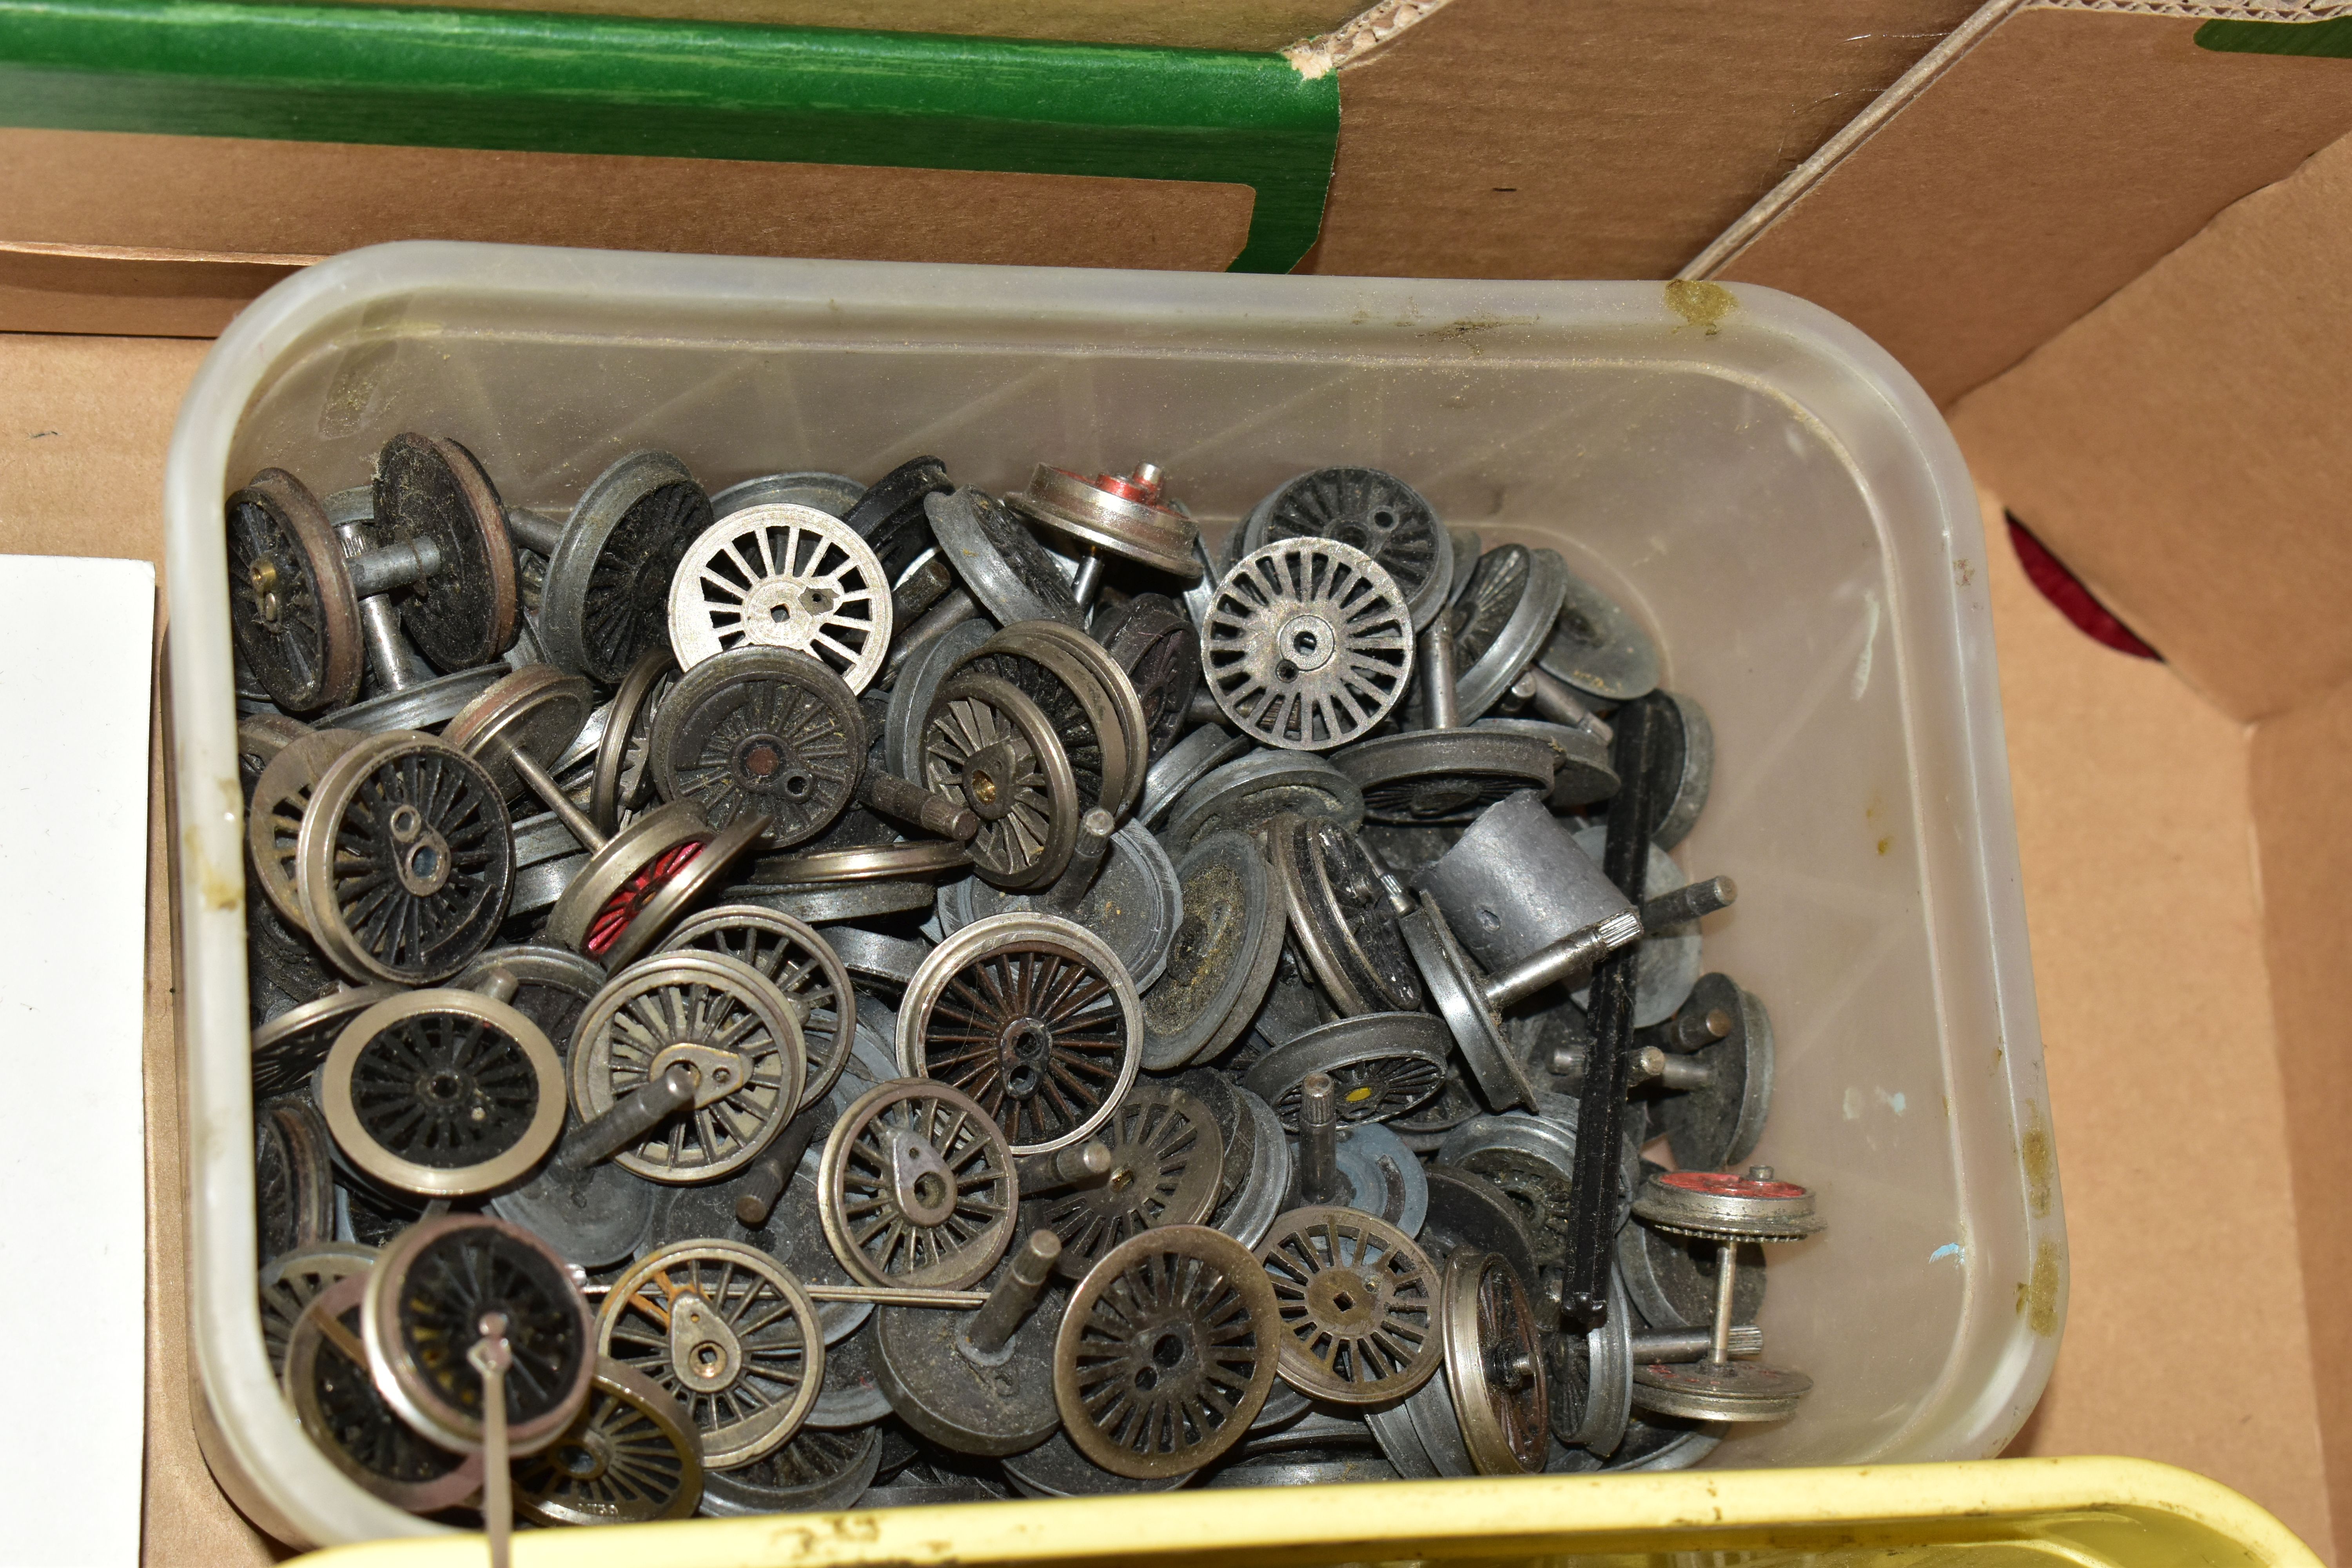 A VERY LARGE QUANTITY OF MODEL RAILWAY LOCOMOTIVE SPARE PARTS, ACCESSORIES AND TOOLS ETC., - Image 20 of 23